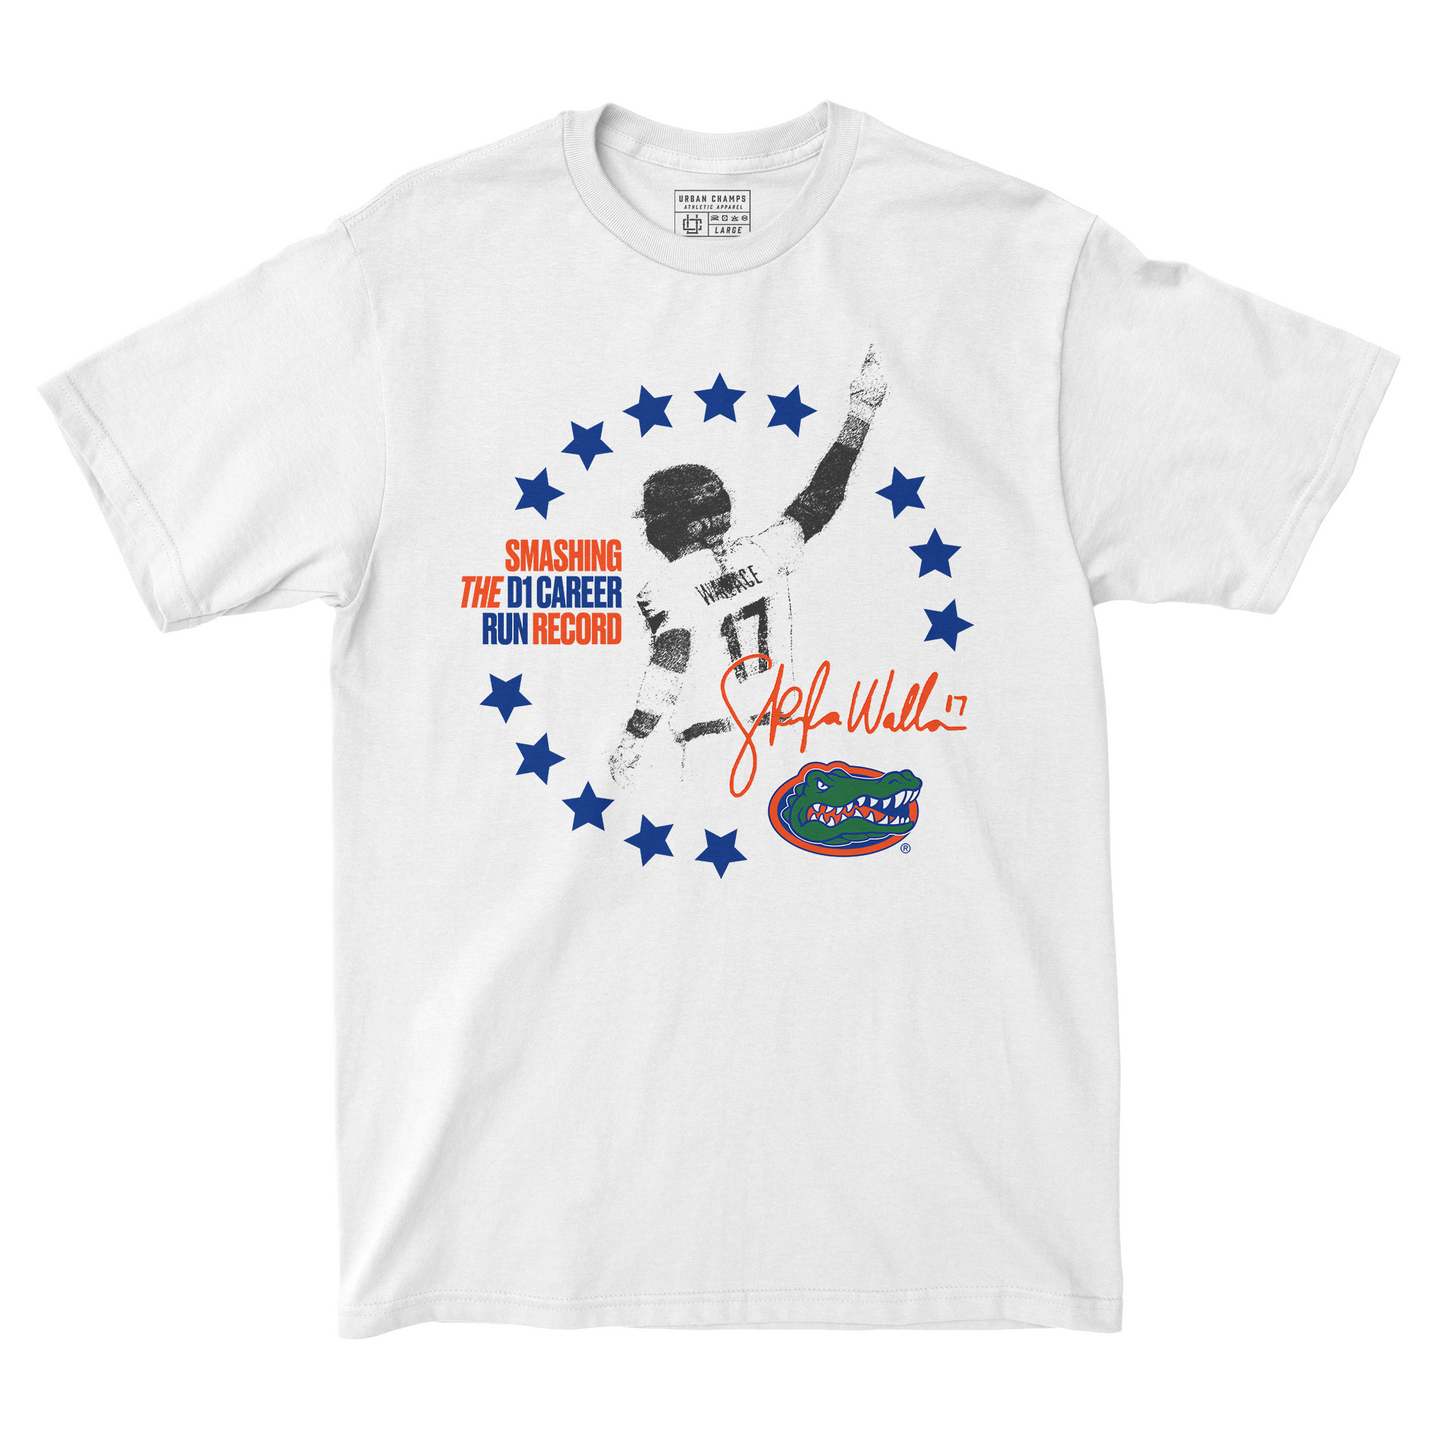 EXCLUSIVE RELEASE: Skylar Wallace D1 All-Time Career Run Record Tee